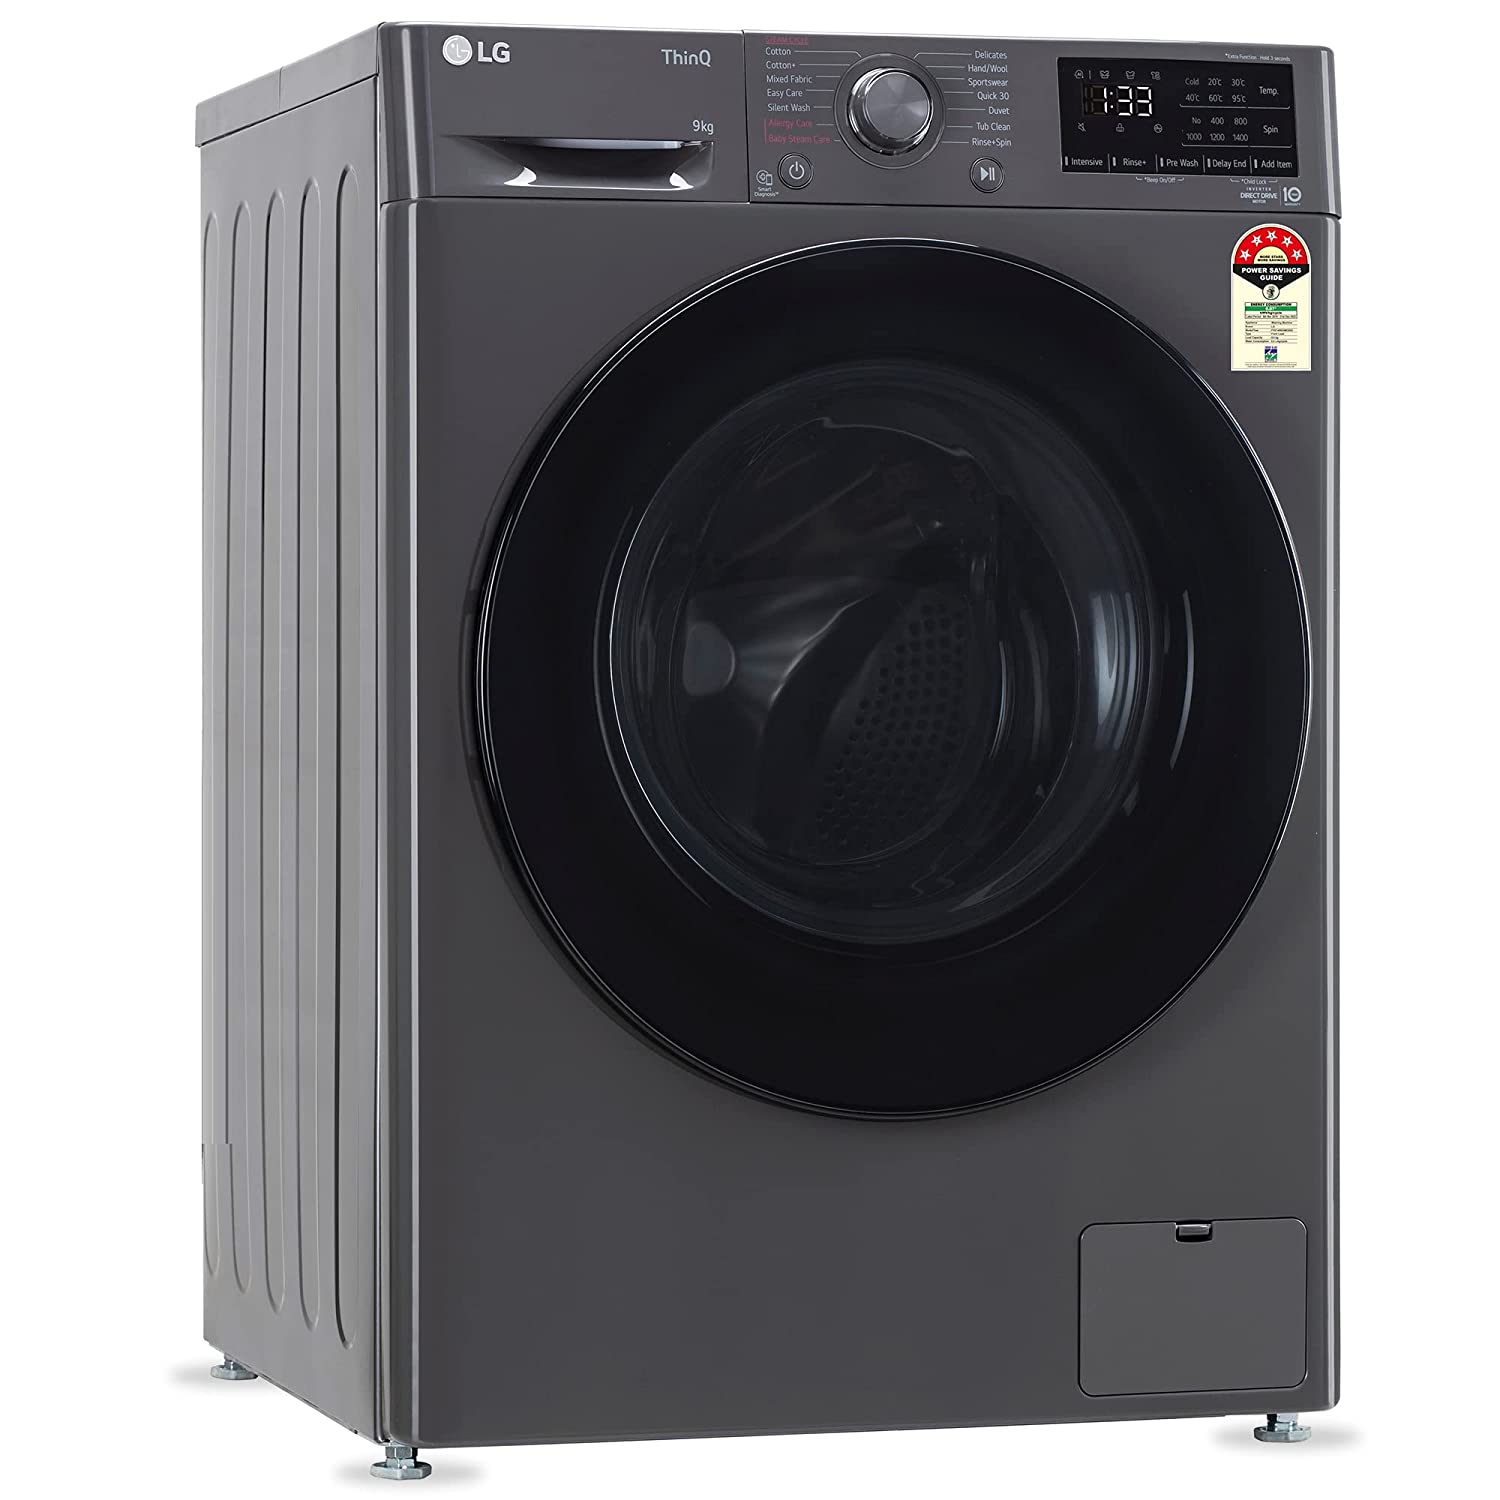 LG FHV1409Z4M 9 Kg 5 Star Inverter Wi-Fi Fully-Automatic Front Loading Washing Machine with Inbuilt heater (Middle Black, AI DD Technology & Steam for Hygiene)